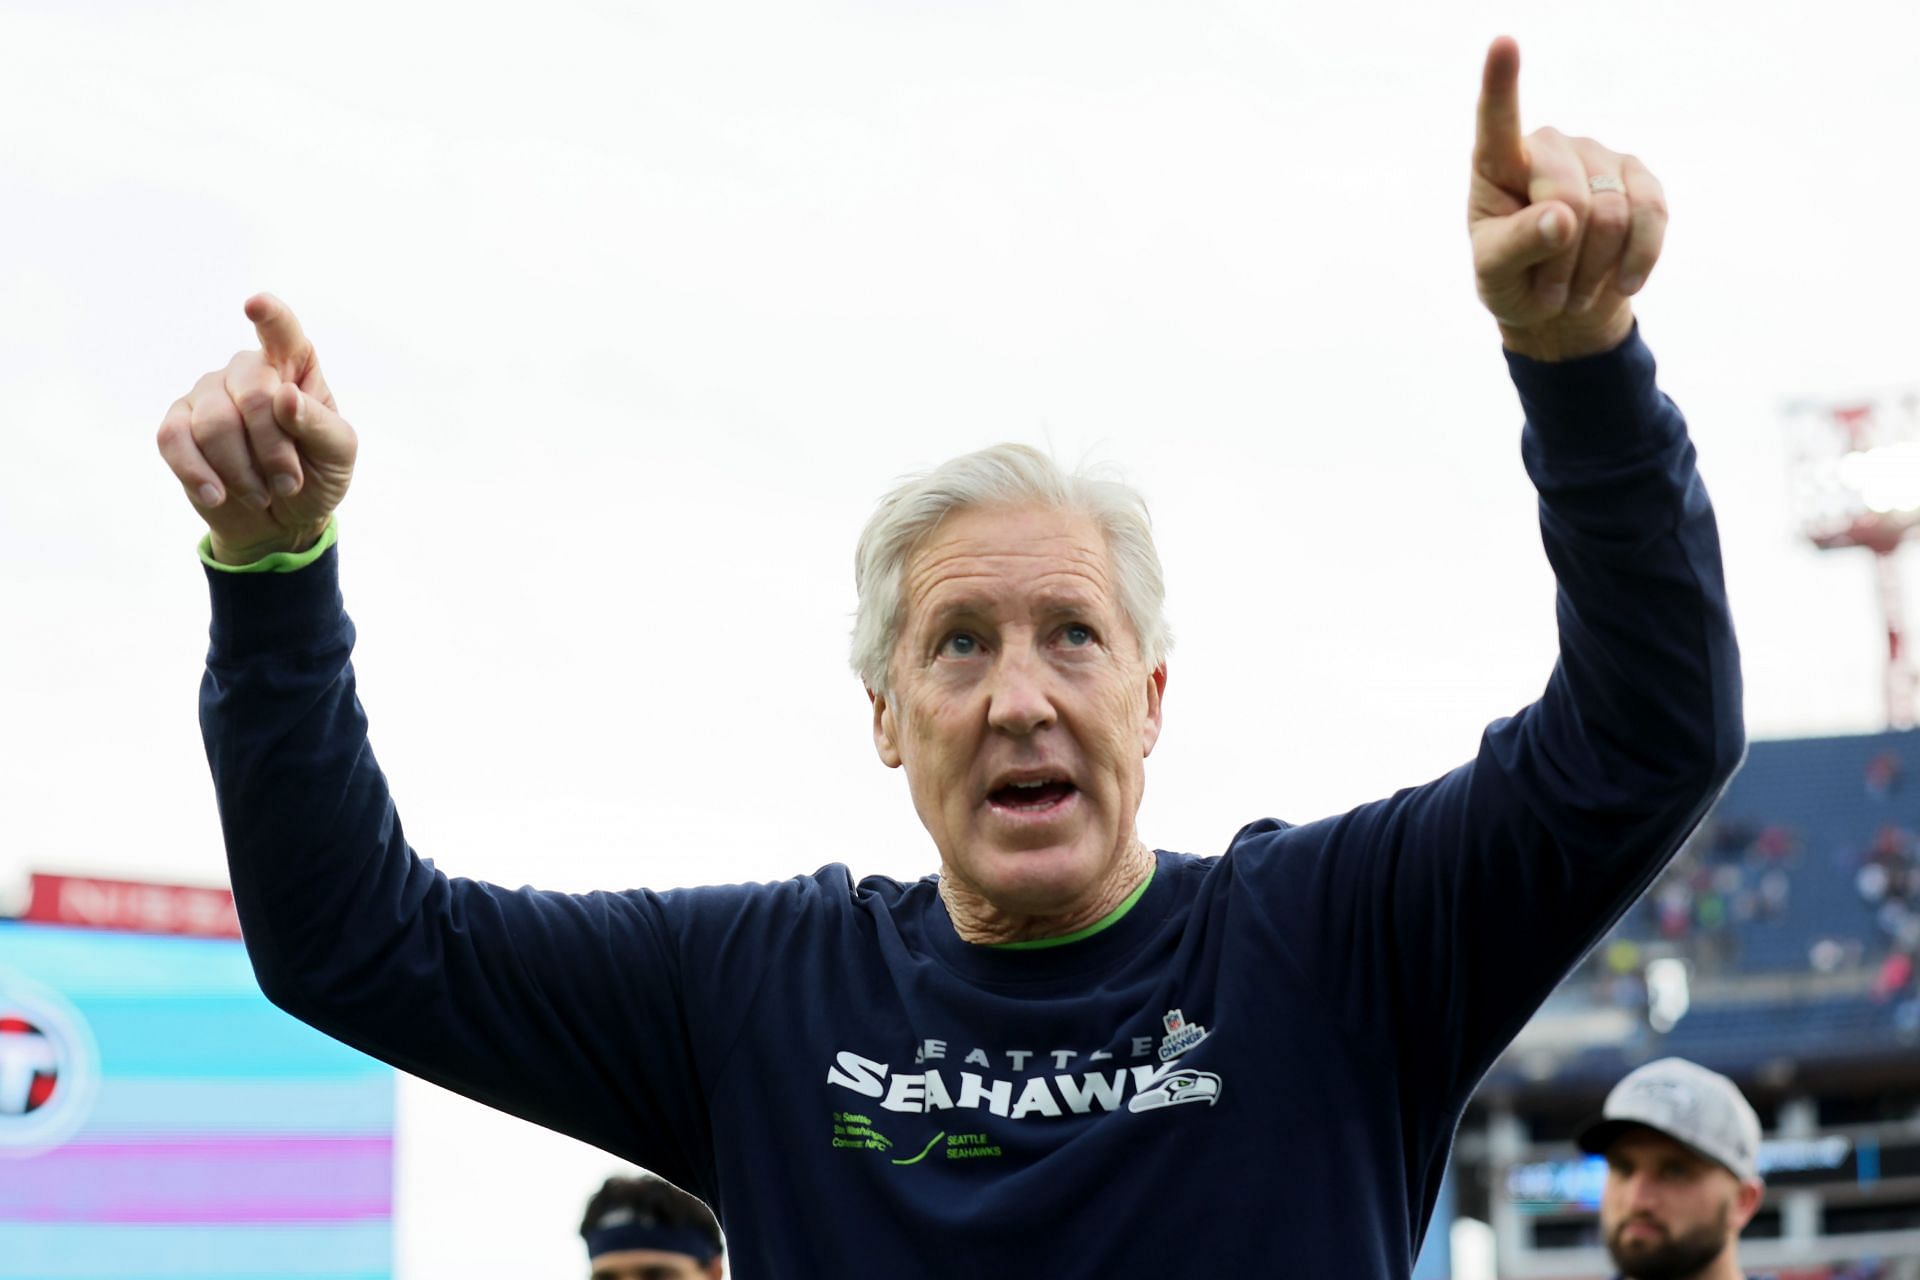 Pete Carroll at Seattle Seahawks v Tennessee Titans